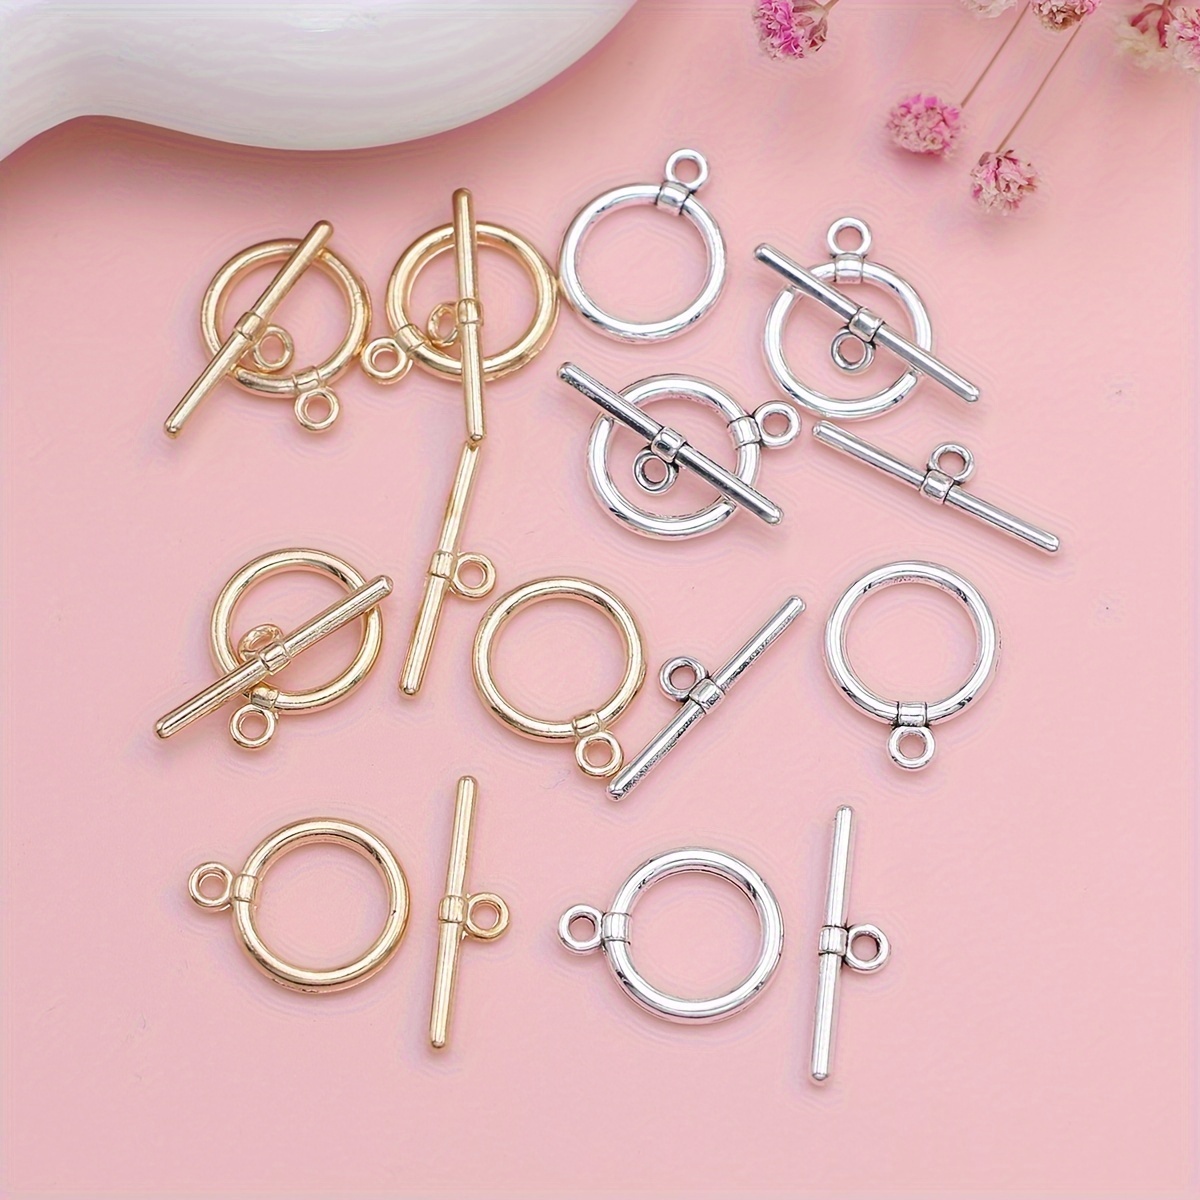 

10 Sets Silver Plated Round-shaped Ot Buckle Toggle Clasps Connectors Ot Clasps Diy Connector Supplies For Jewelry Making Handmade Necklace Bracelet Accessories